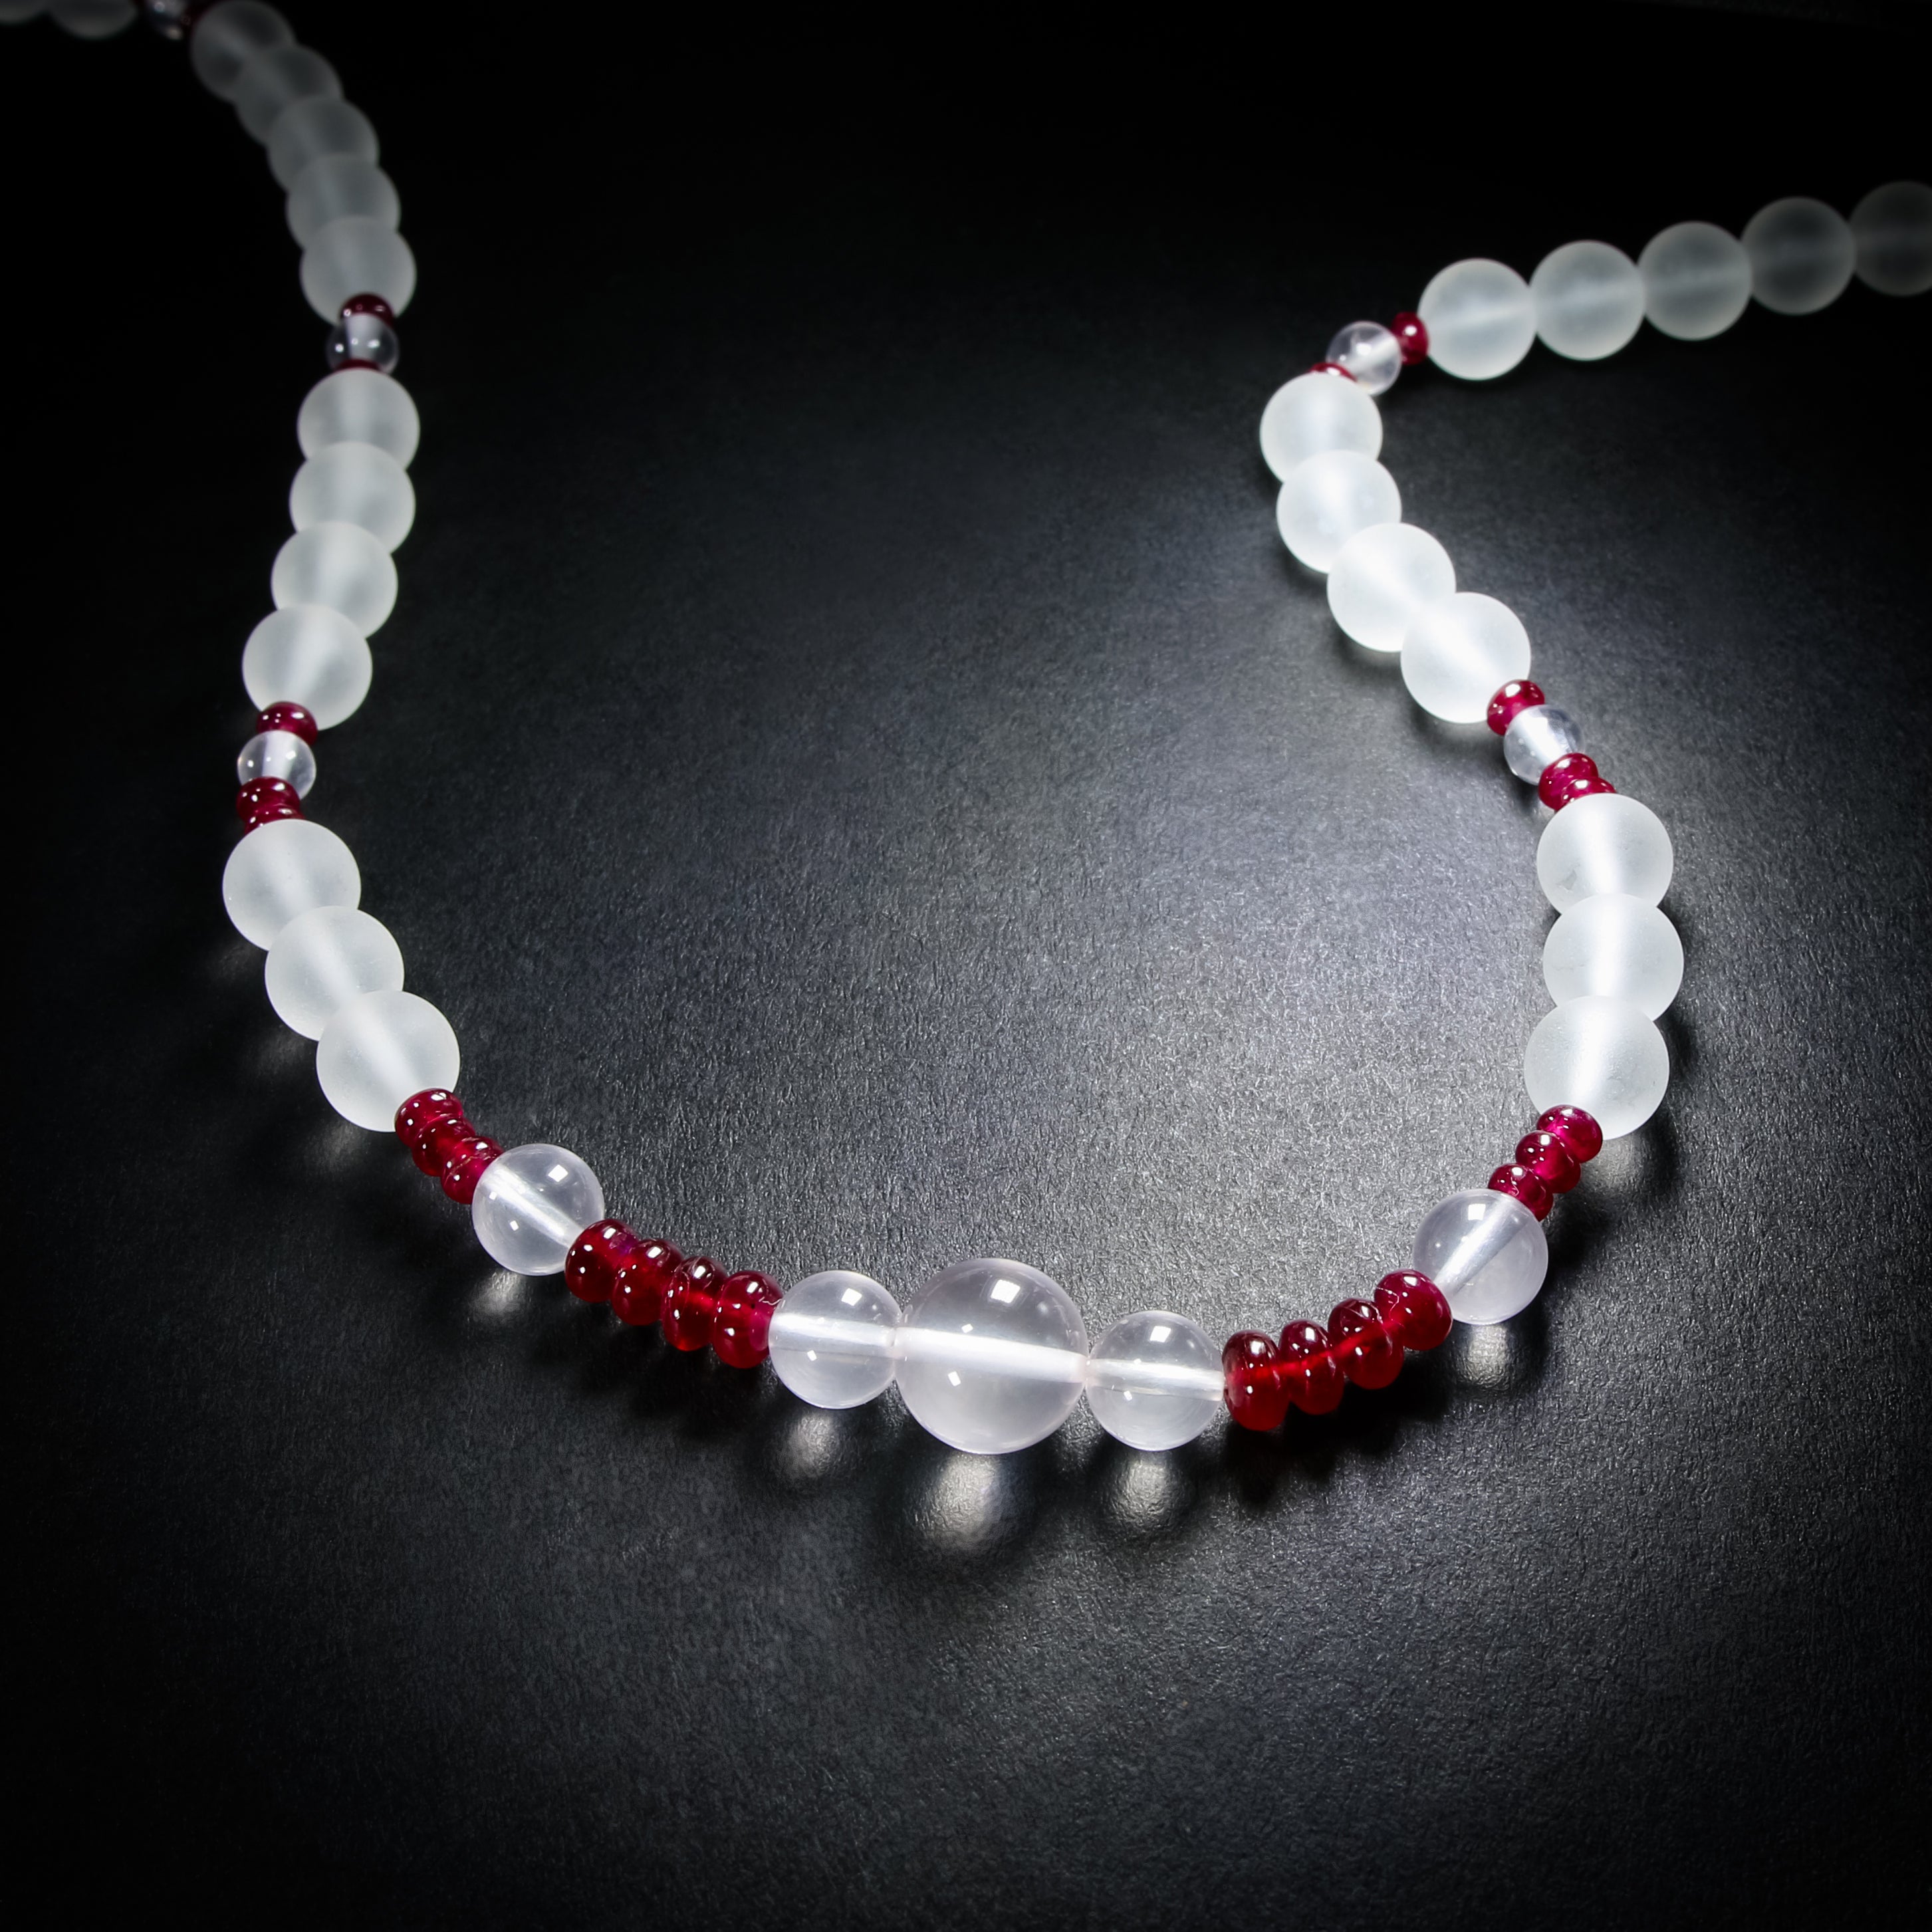 Crystal healing Ruby Dream gemstone necklace known for helping heal and open your heart chakra